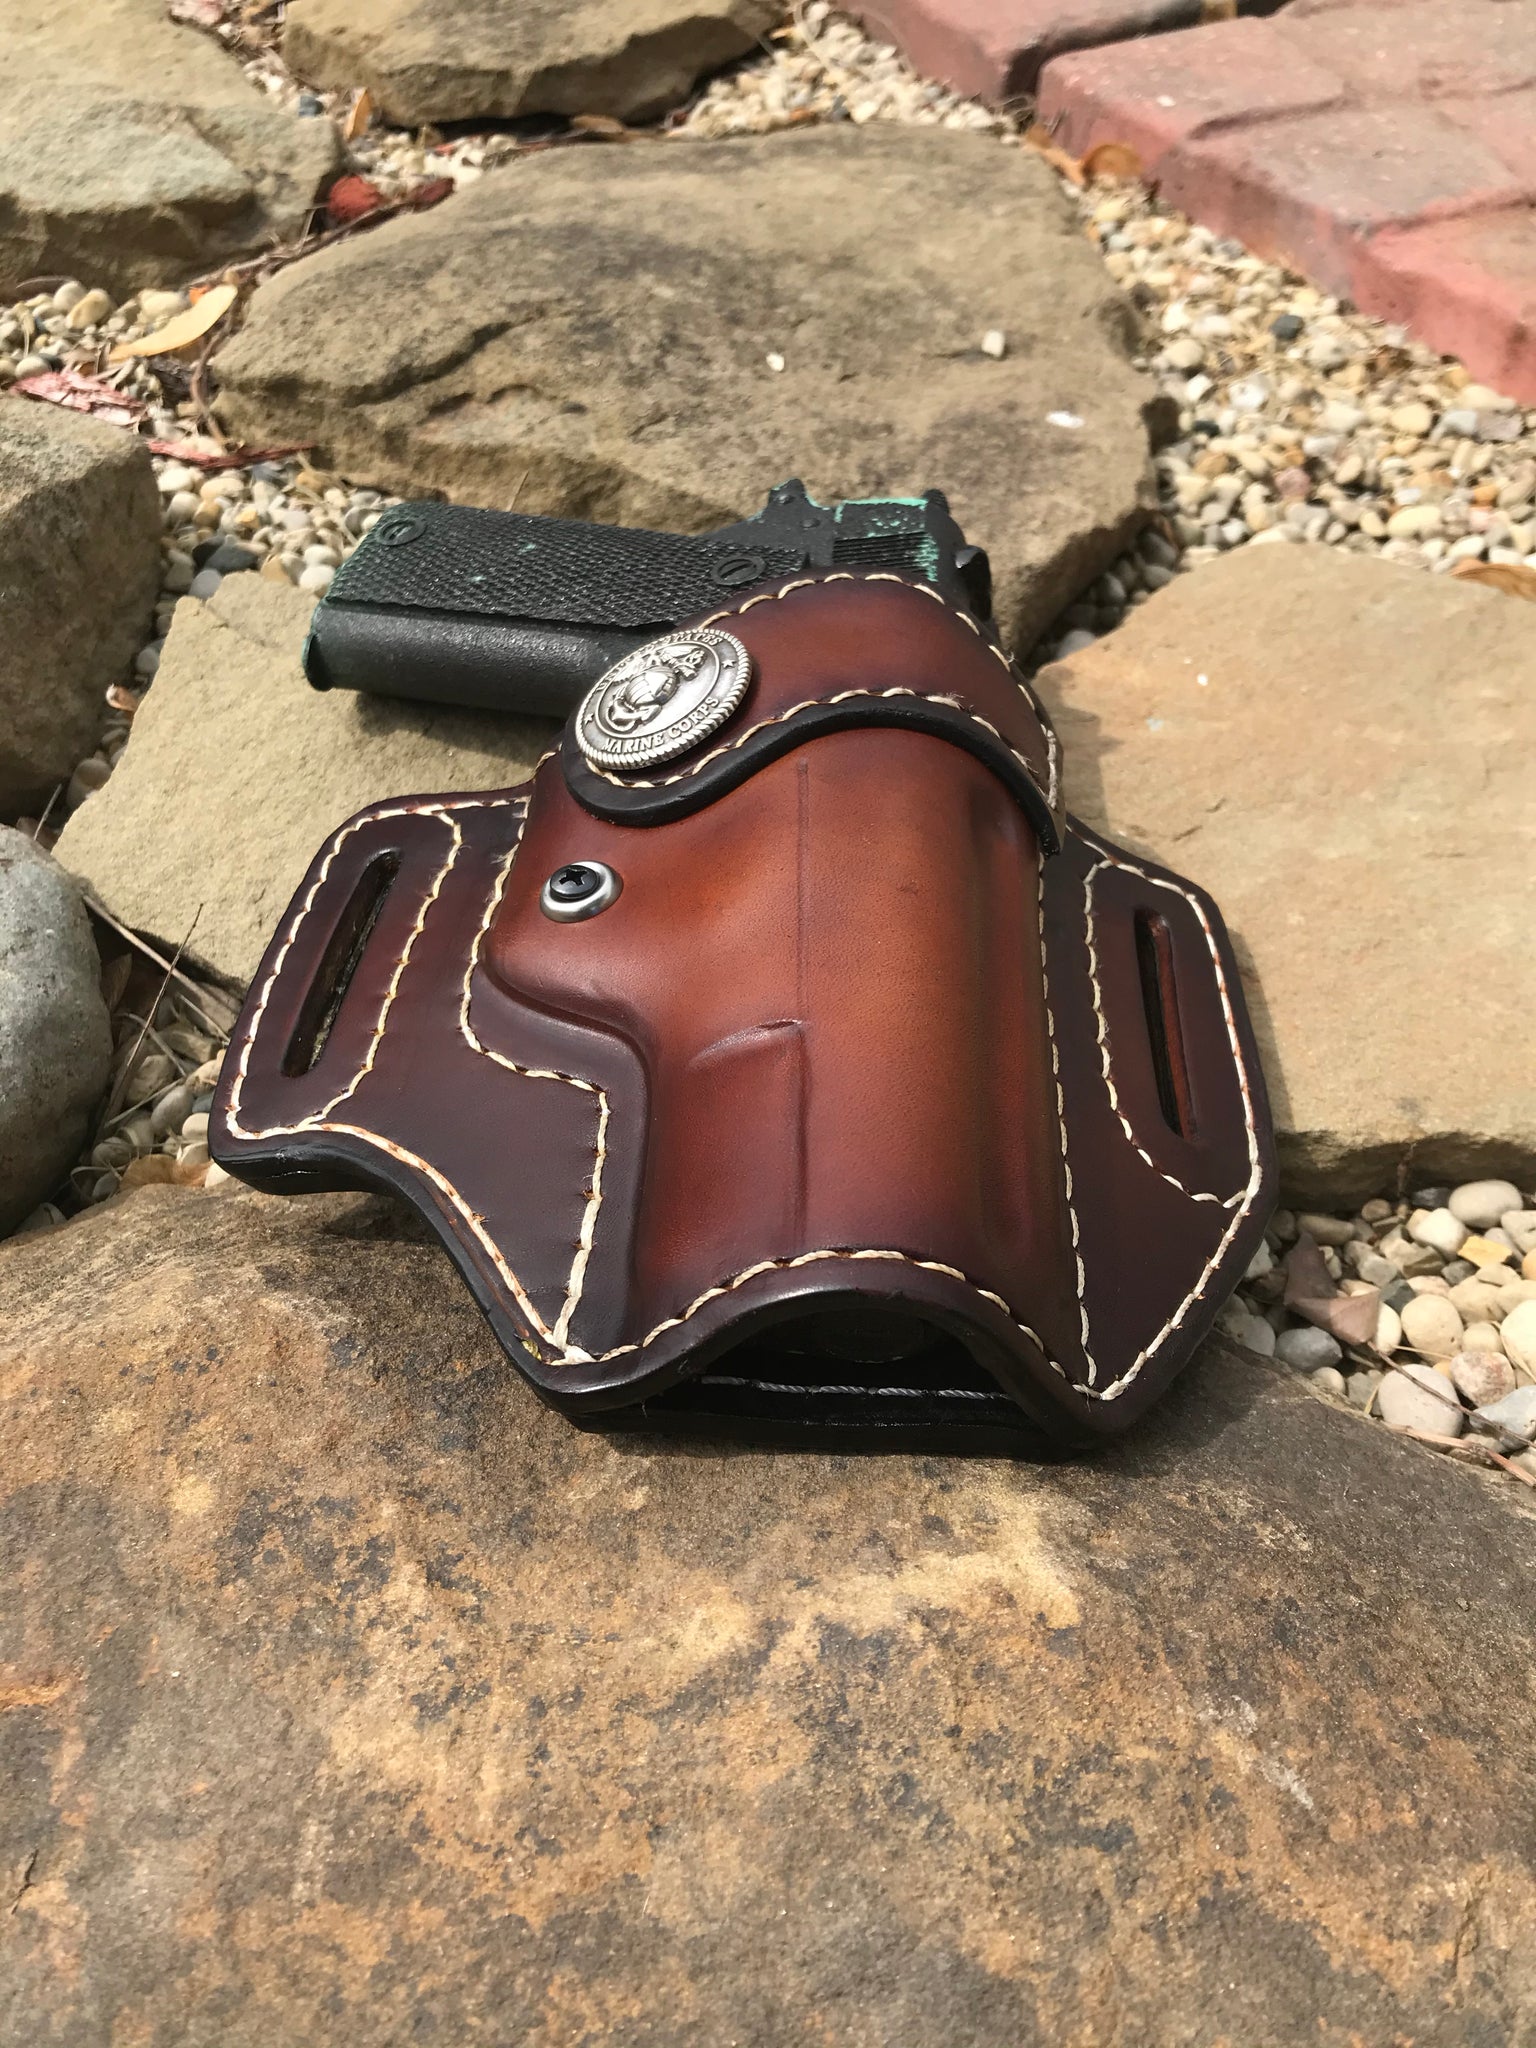 NEW TOP SELLING OWB Locking Leather Holster With Emblem